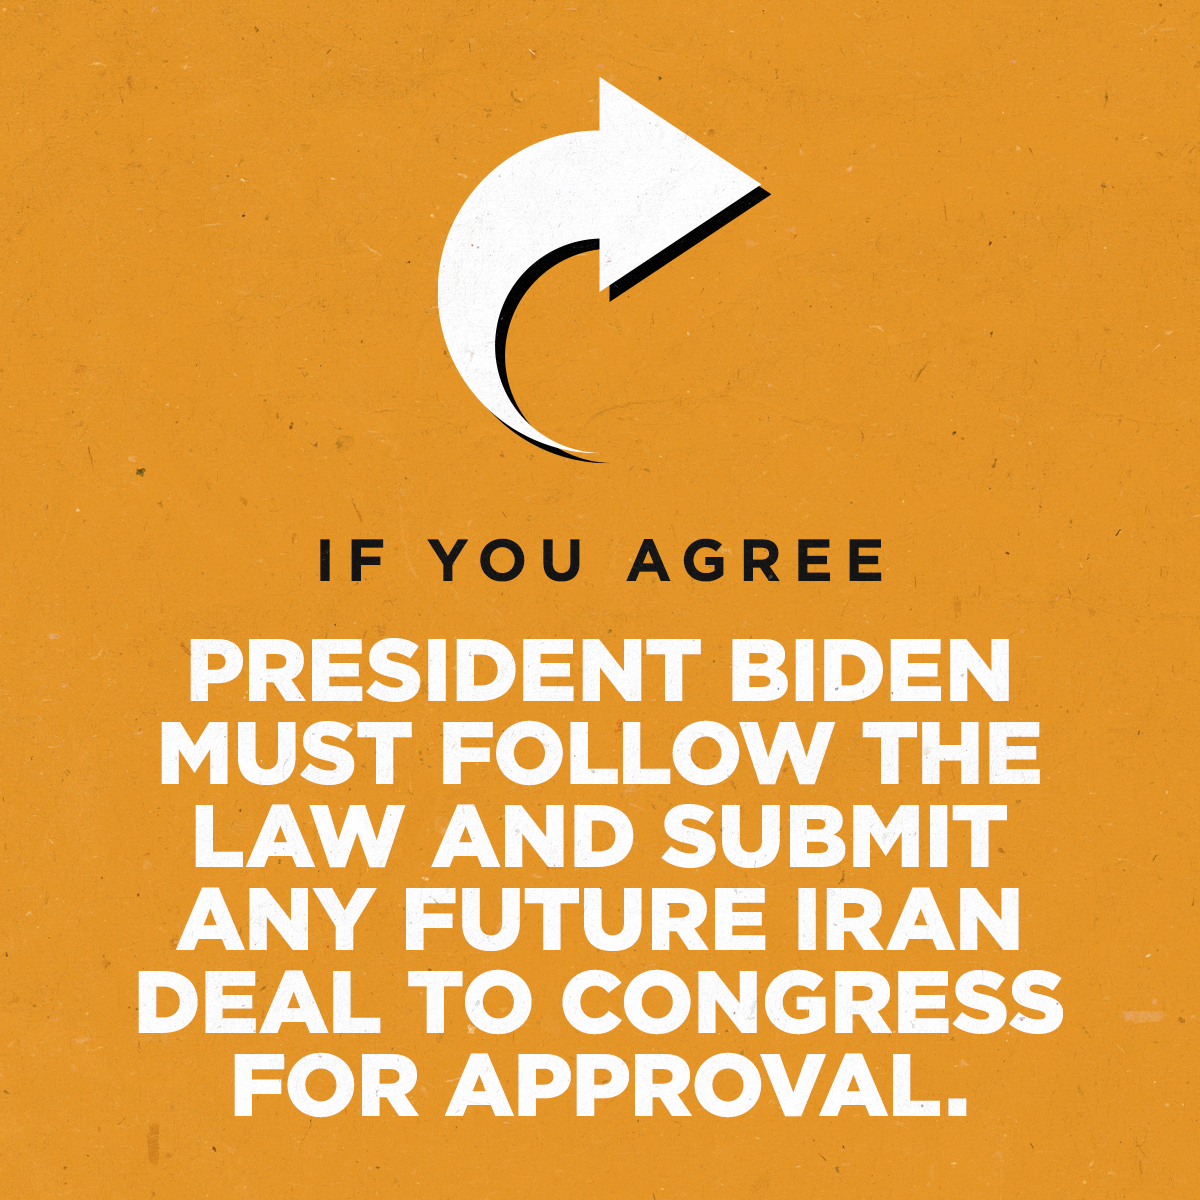 Share if you agree. President Biden must follow the law and submit any future Iran Deal to Congress for apporval.